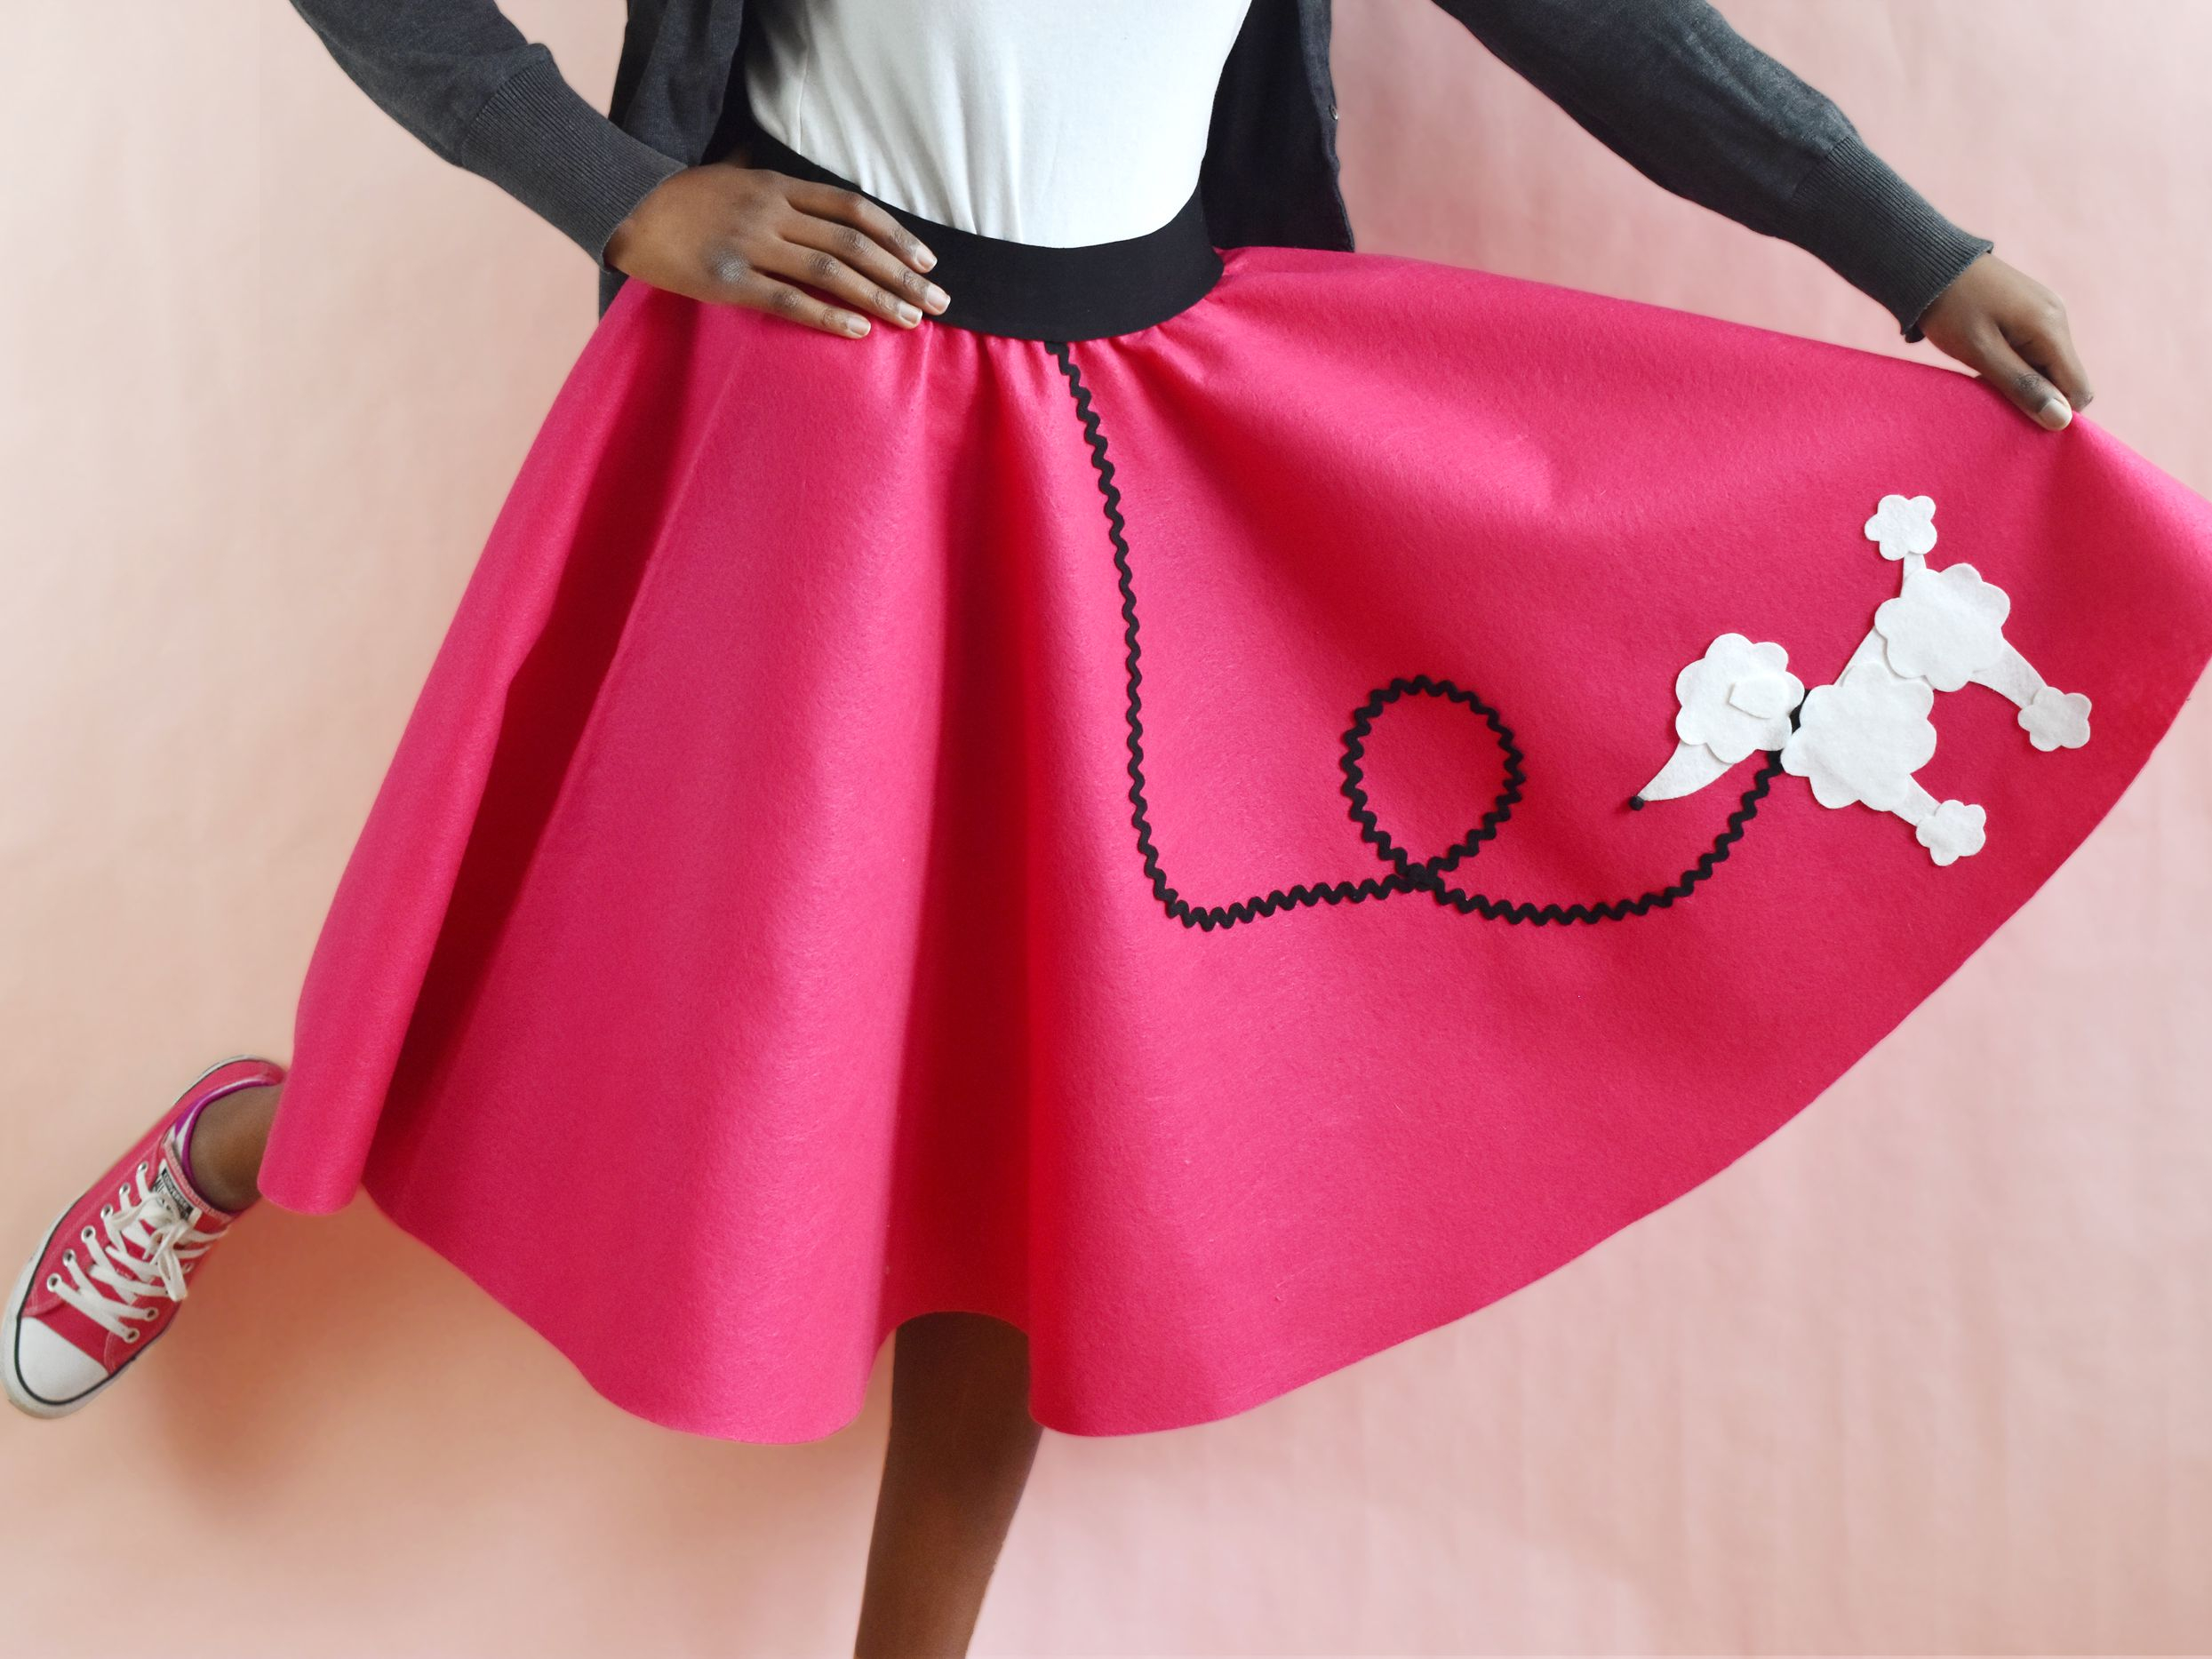 Origami Poodle Instructions How To Make An Easy Sew Poodle Skirt